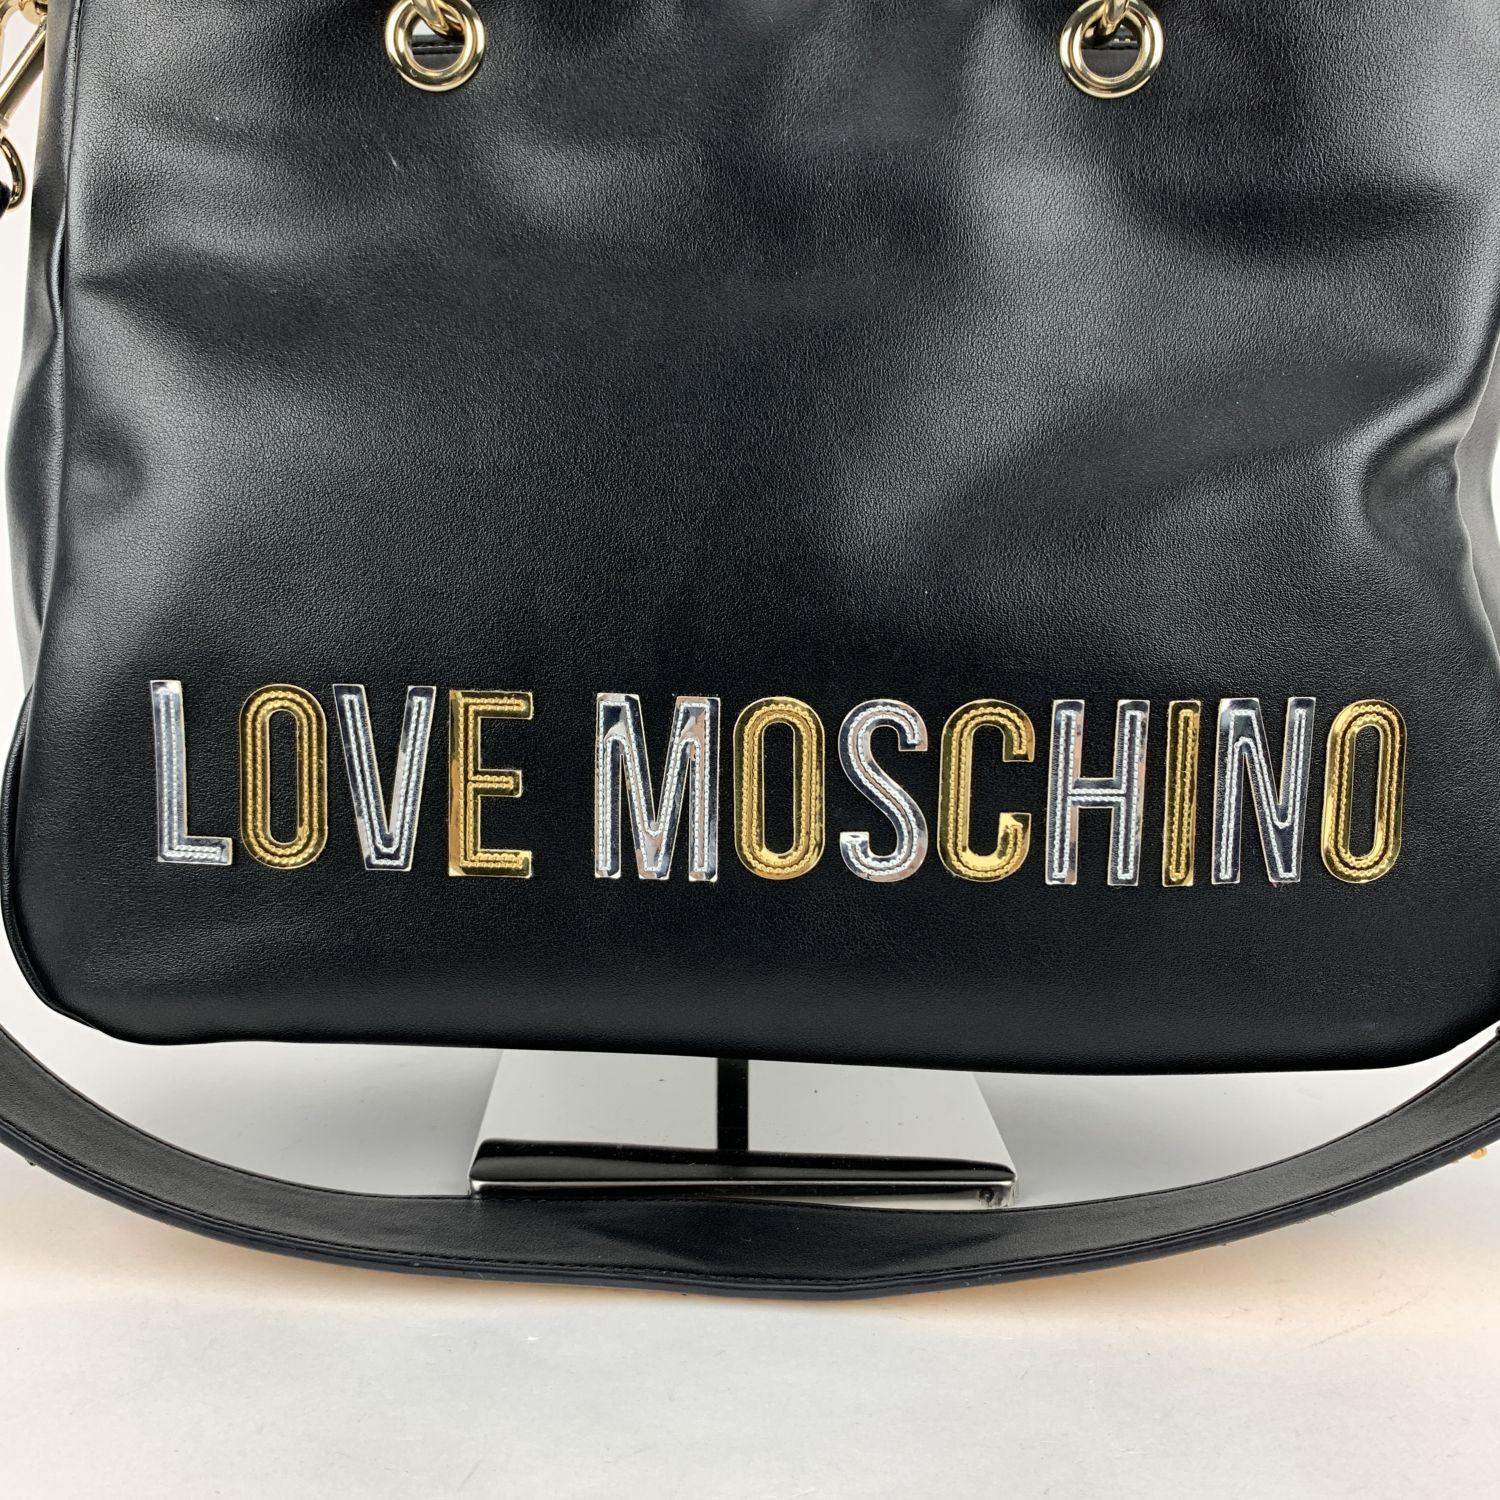 Love Moschino black tote bag with gold and silver logo lettering on the front. It features double handles and removable shoulder strap, with gold-tone sequin strap. Upper zipper closure. Red satin lining. 1 side zip pocket and 1 side open pocket